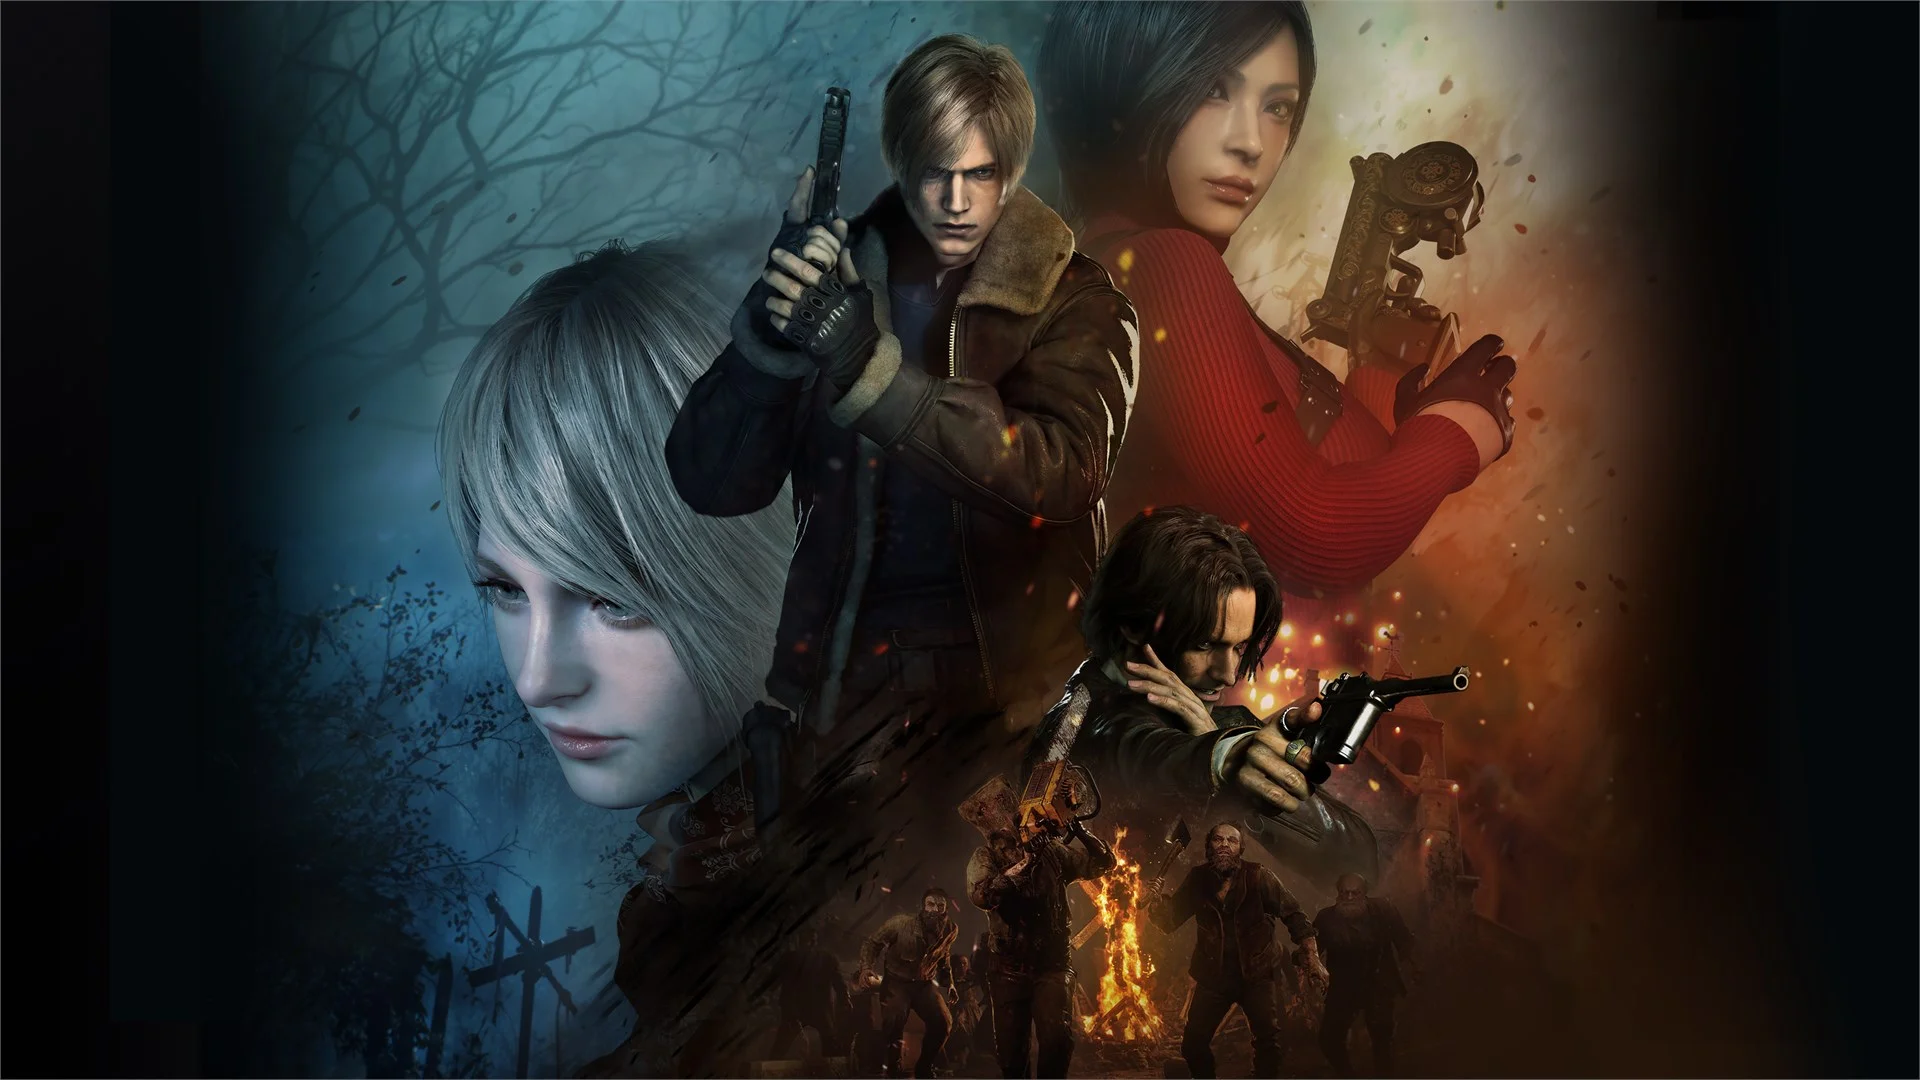 The release of the “Gold Edition” of the Resident Evil 4 remake took place